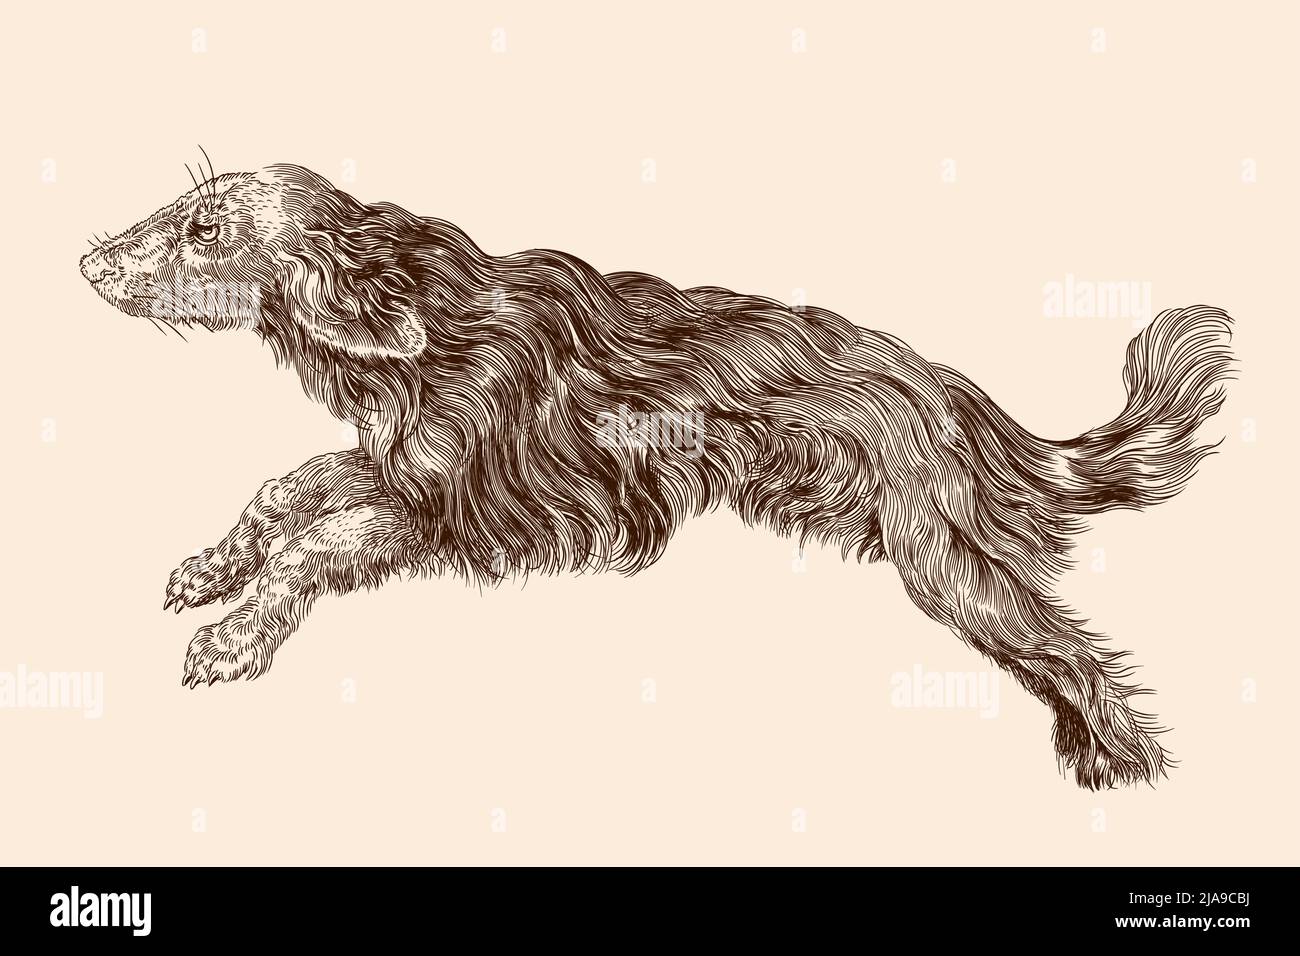 Shaggy dog with long hair in a jump. Vector illustration isolated on a beige background. Stock Vector